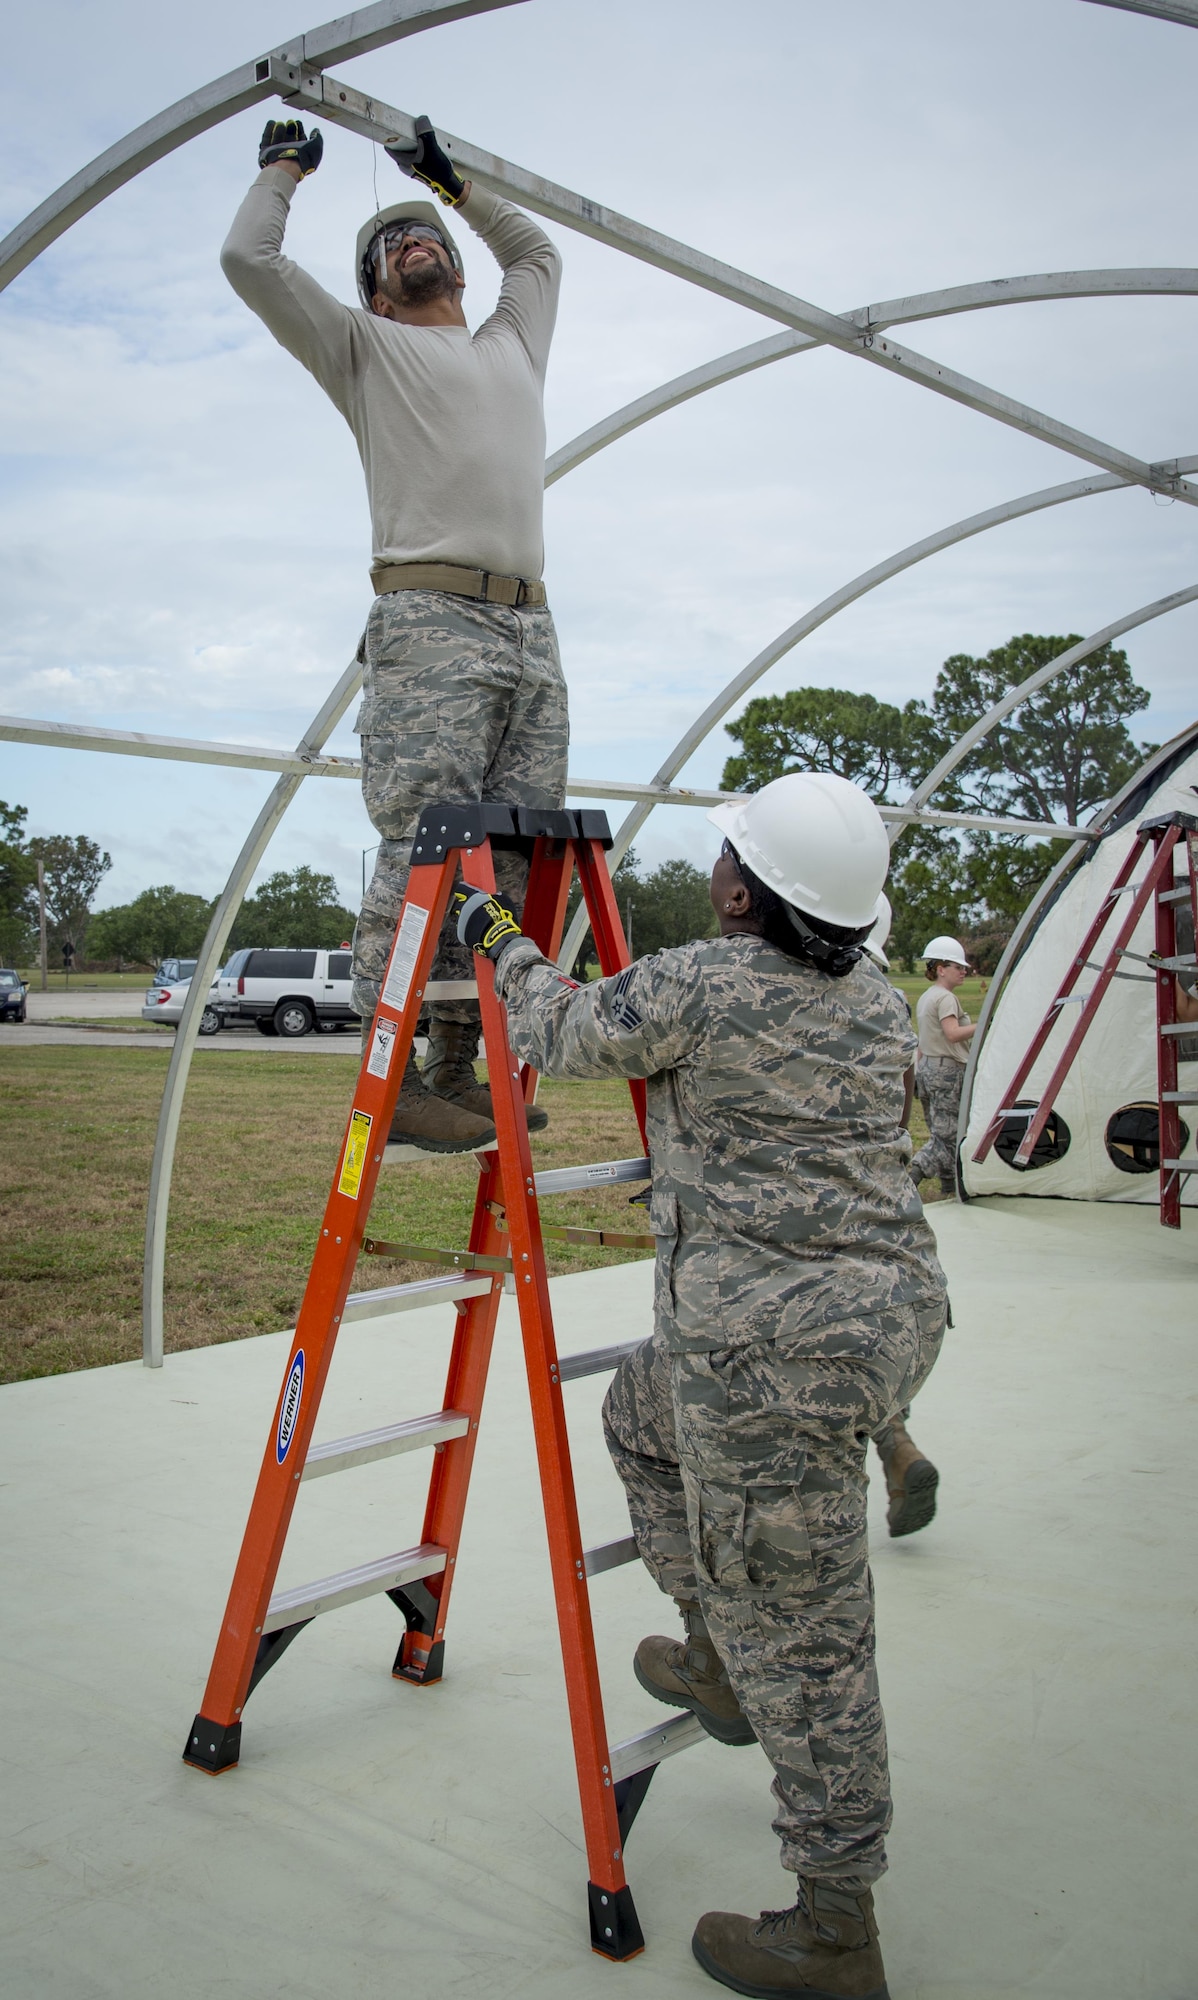 Services Airmen assigned to the 6th Force Support Squadron, remove the supporting structure of the Small Shelter System in order to put the tent away during Home Station Training at MacDill Air Force Base, Fla., Oct. 5, 2017. During the two-day course, they work with two types of tents, the Temper Tent and the Small Shelter System. (U.S. Air Force photo by Senior Airman Mariette Adams)